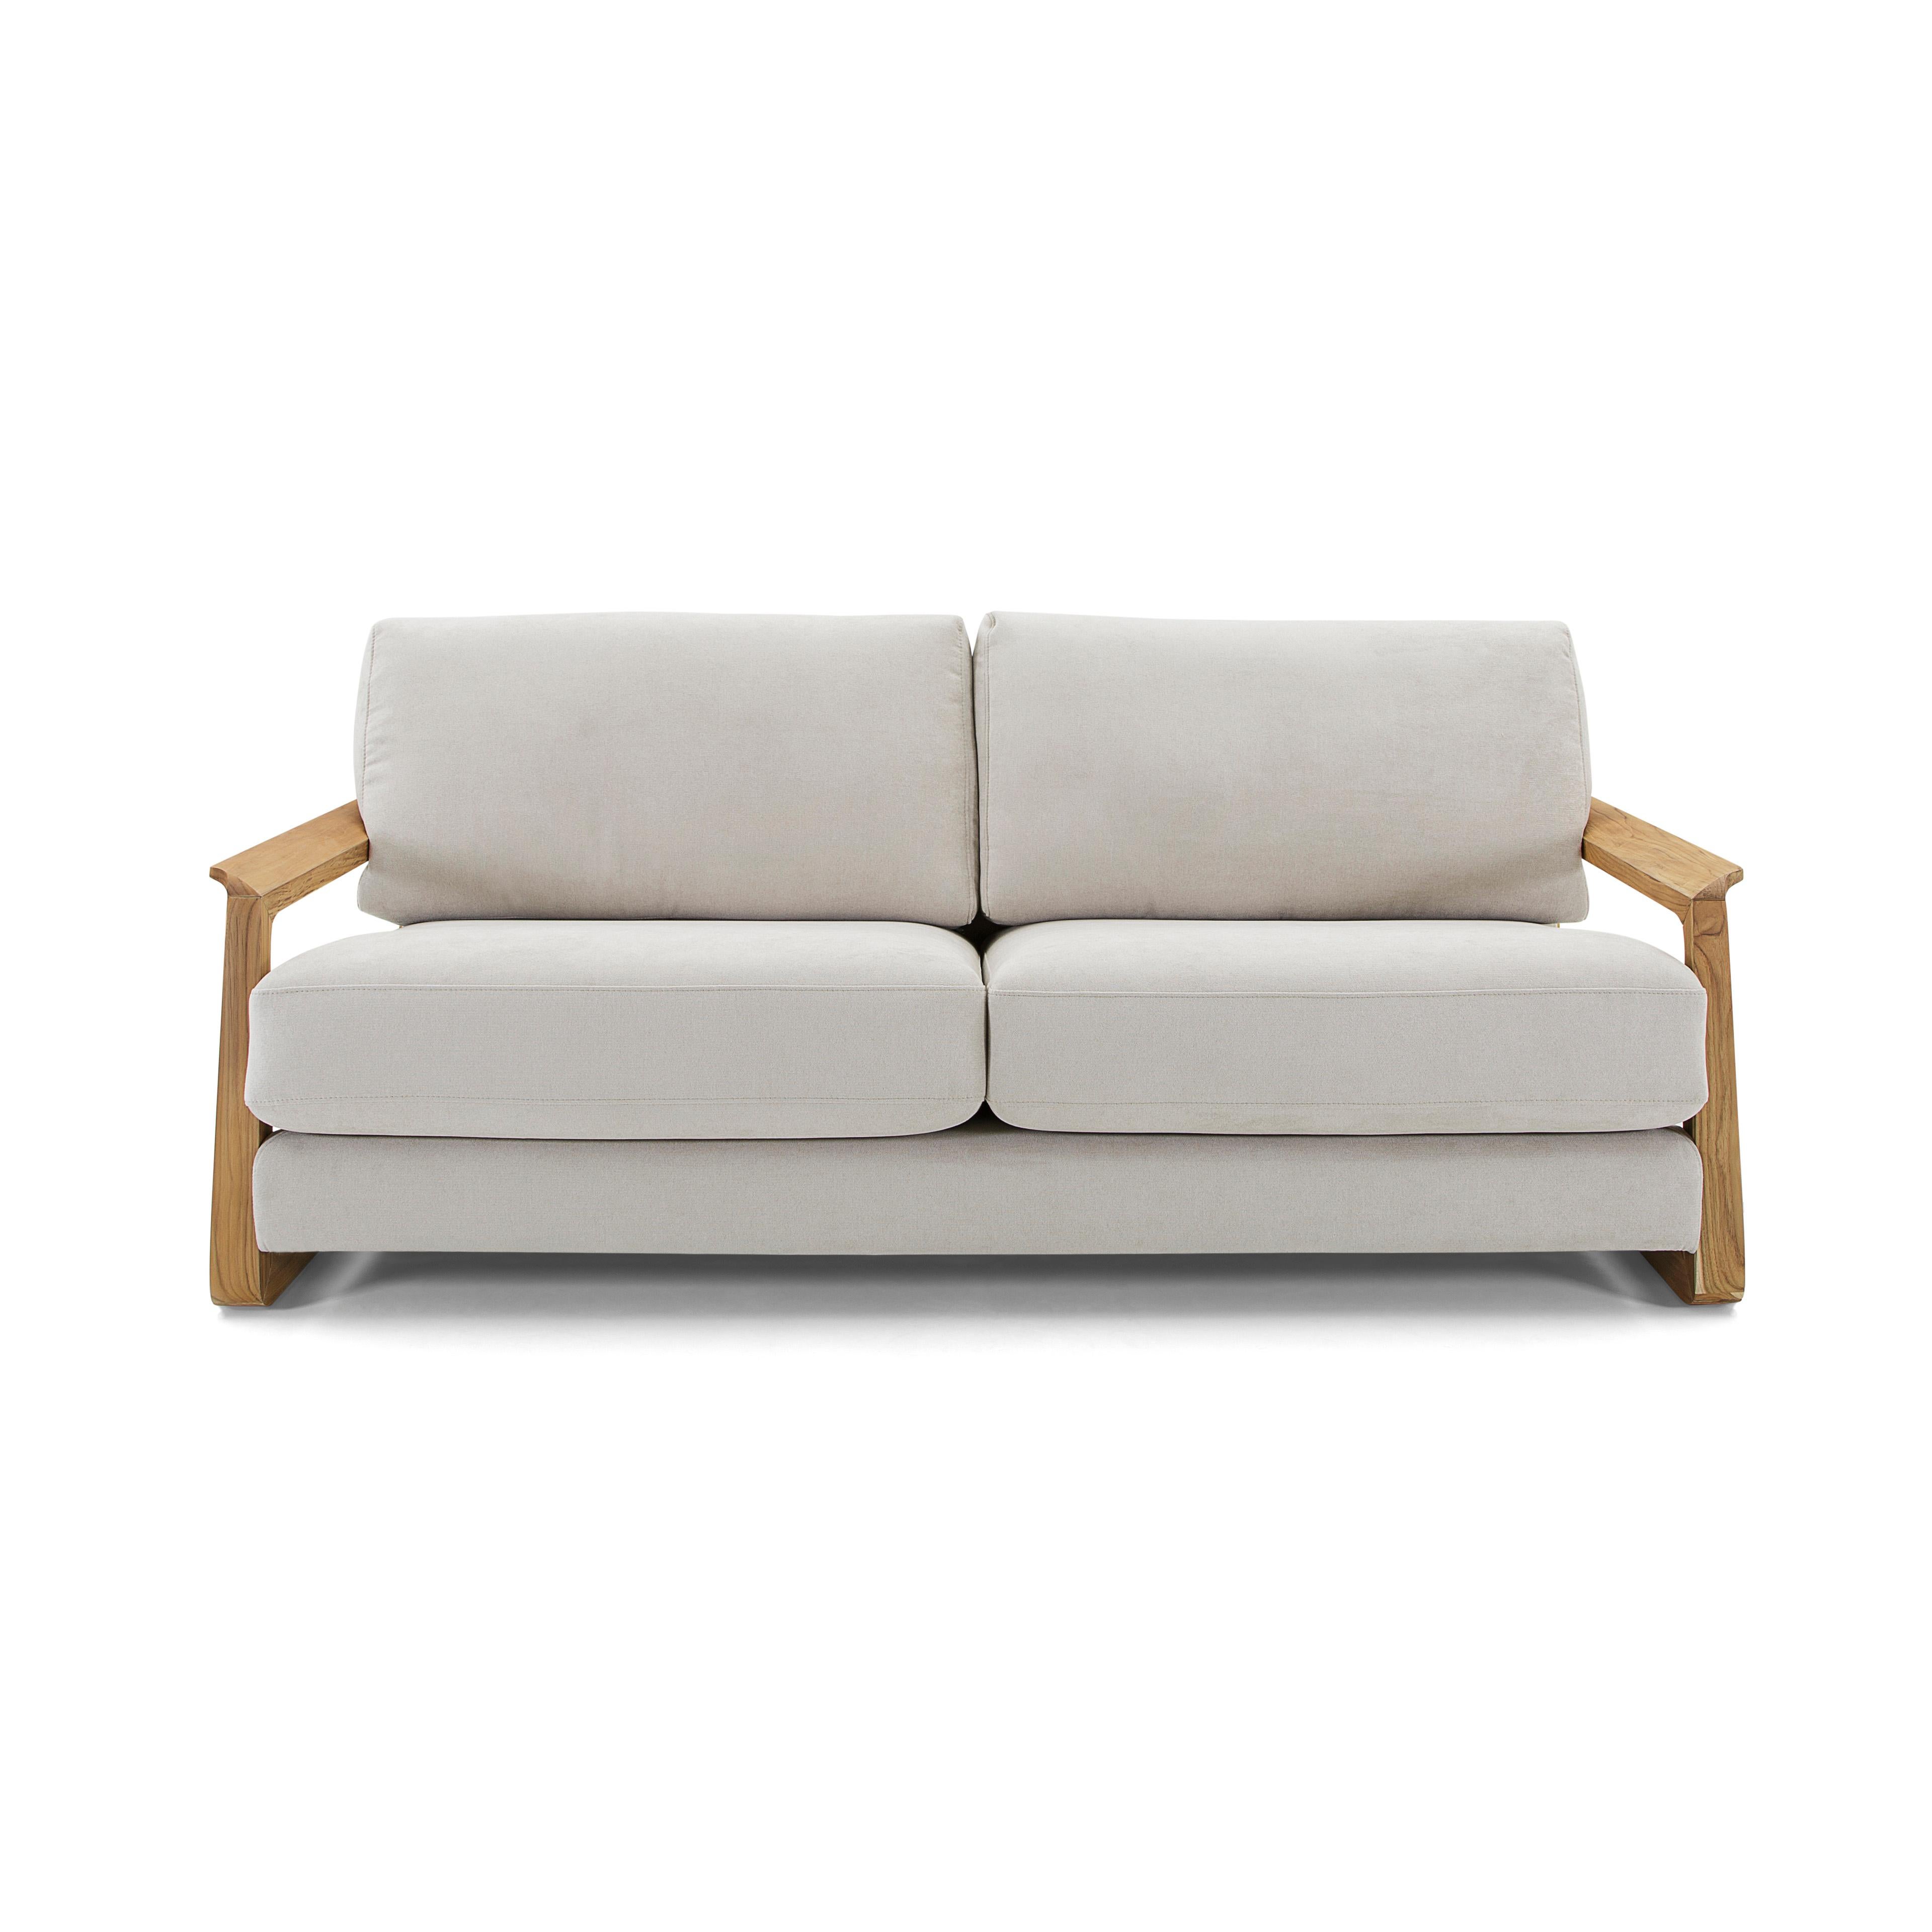 Fine Three-Seat Sofa Upholstered in an Oatmeal Fabric and Teak Wood Arms For Sale 1